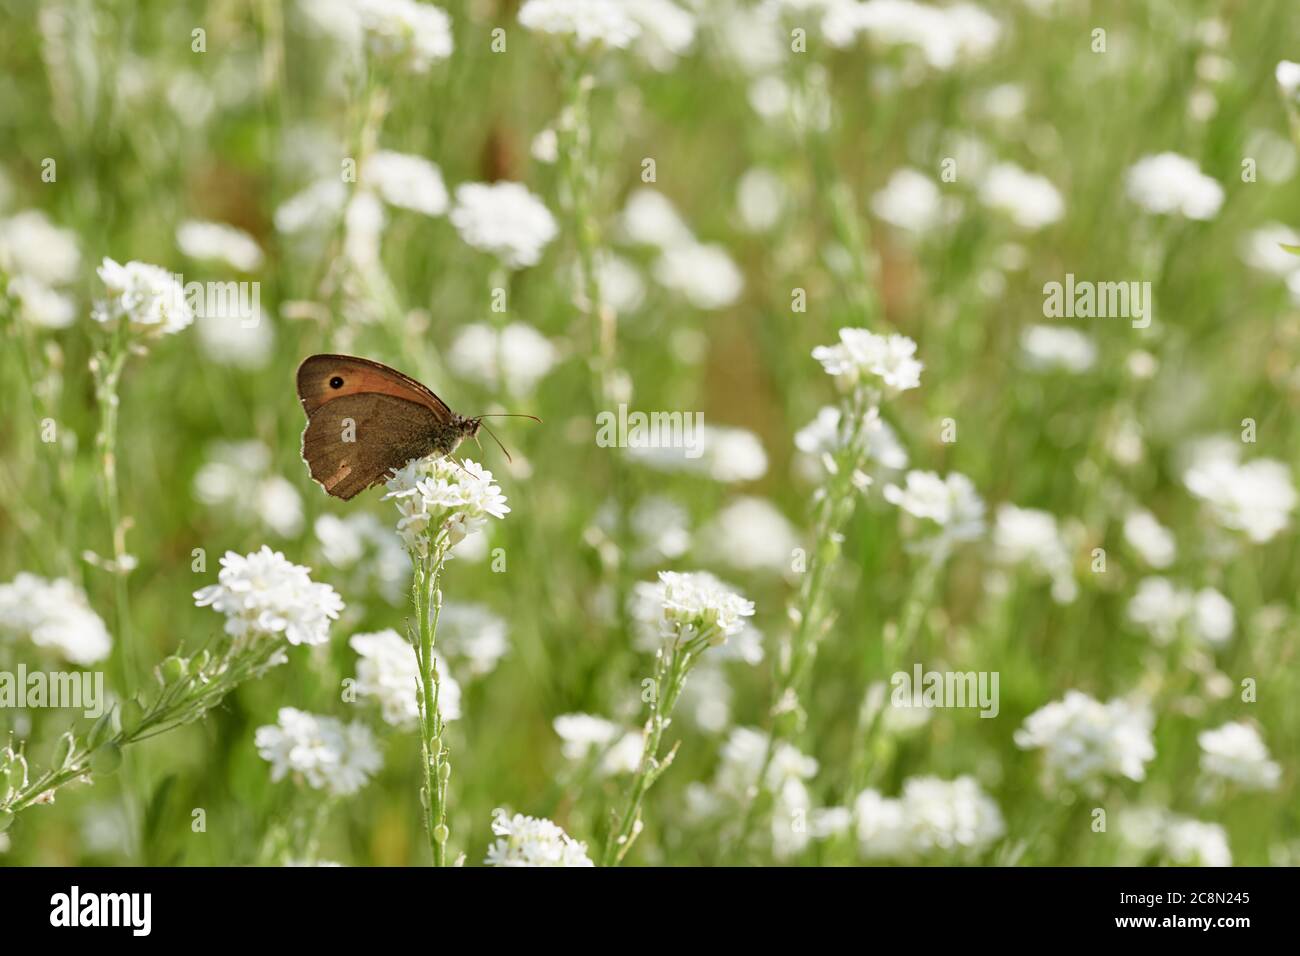 Small heath (Coenonympha lyllus) sitting on white flower in meadow with many wild flowers Stock Photo